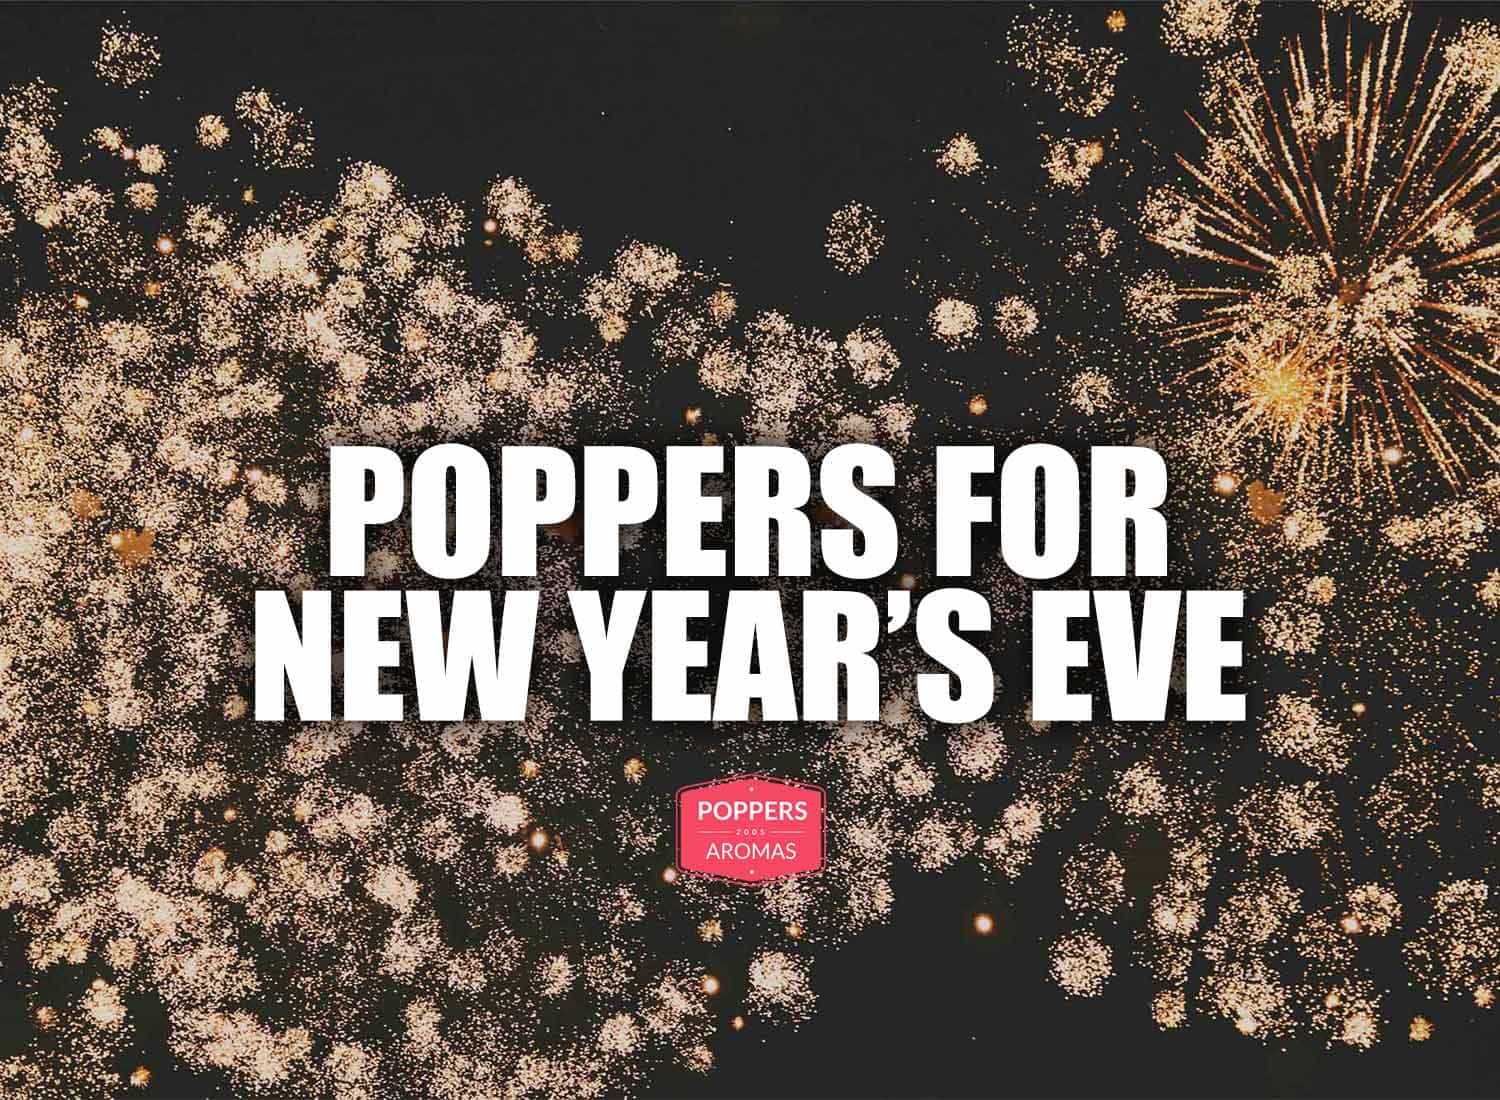 Poppers for New Year's Eve